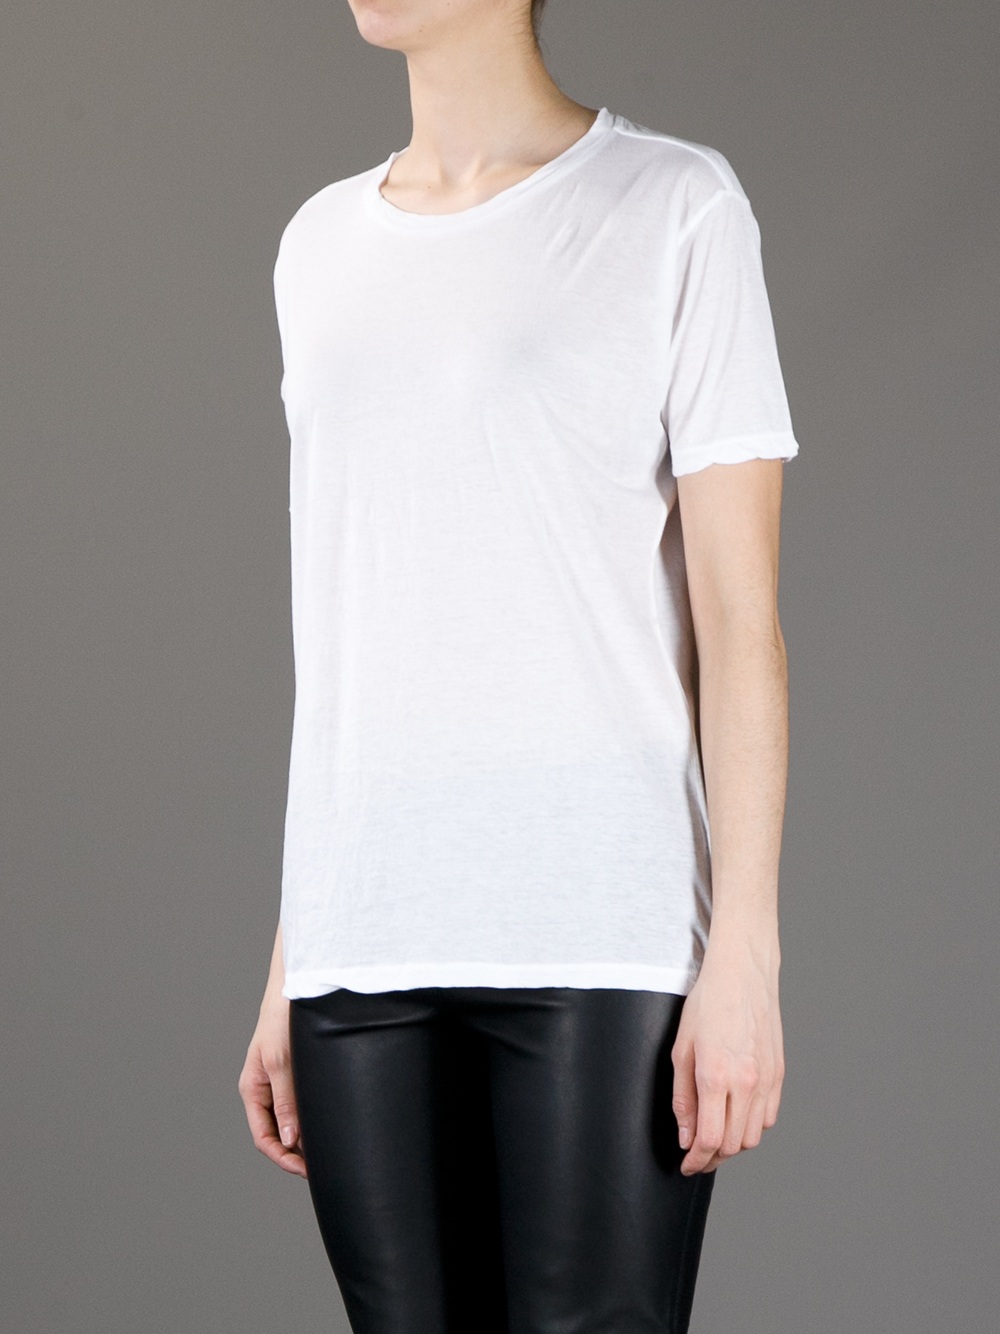 Carin Wester Classic T-shirt in White - Lyst